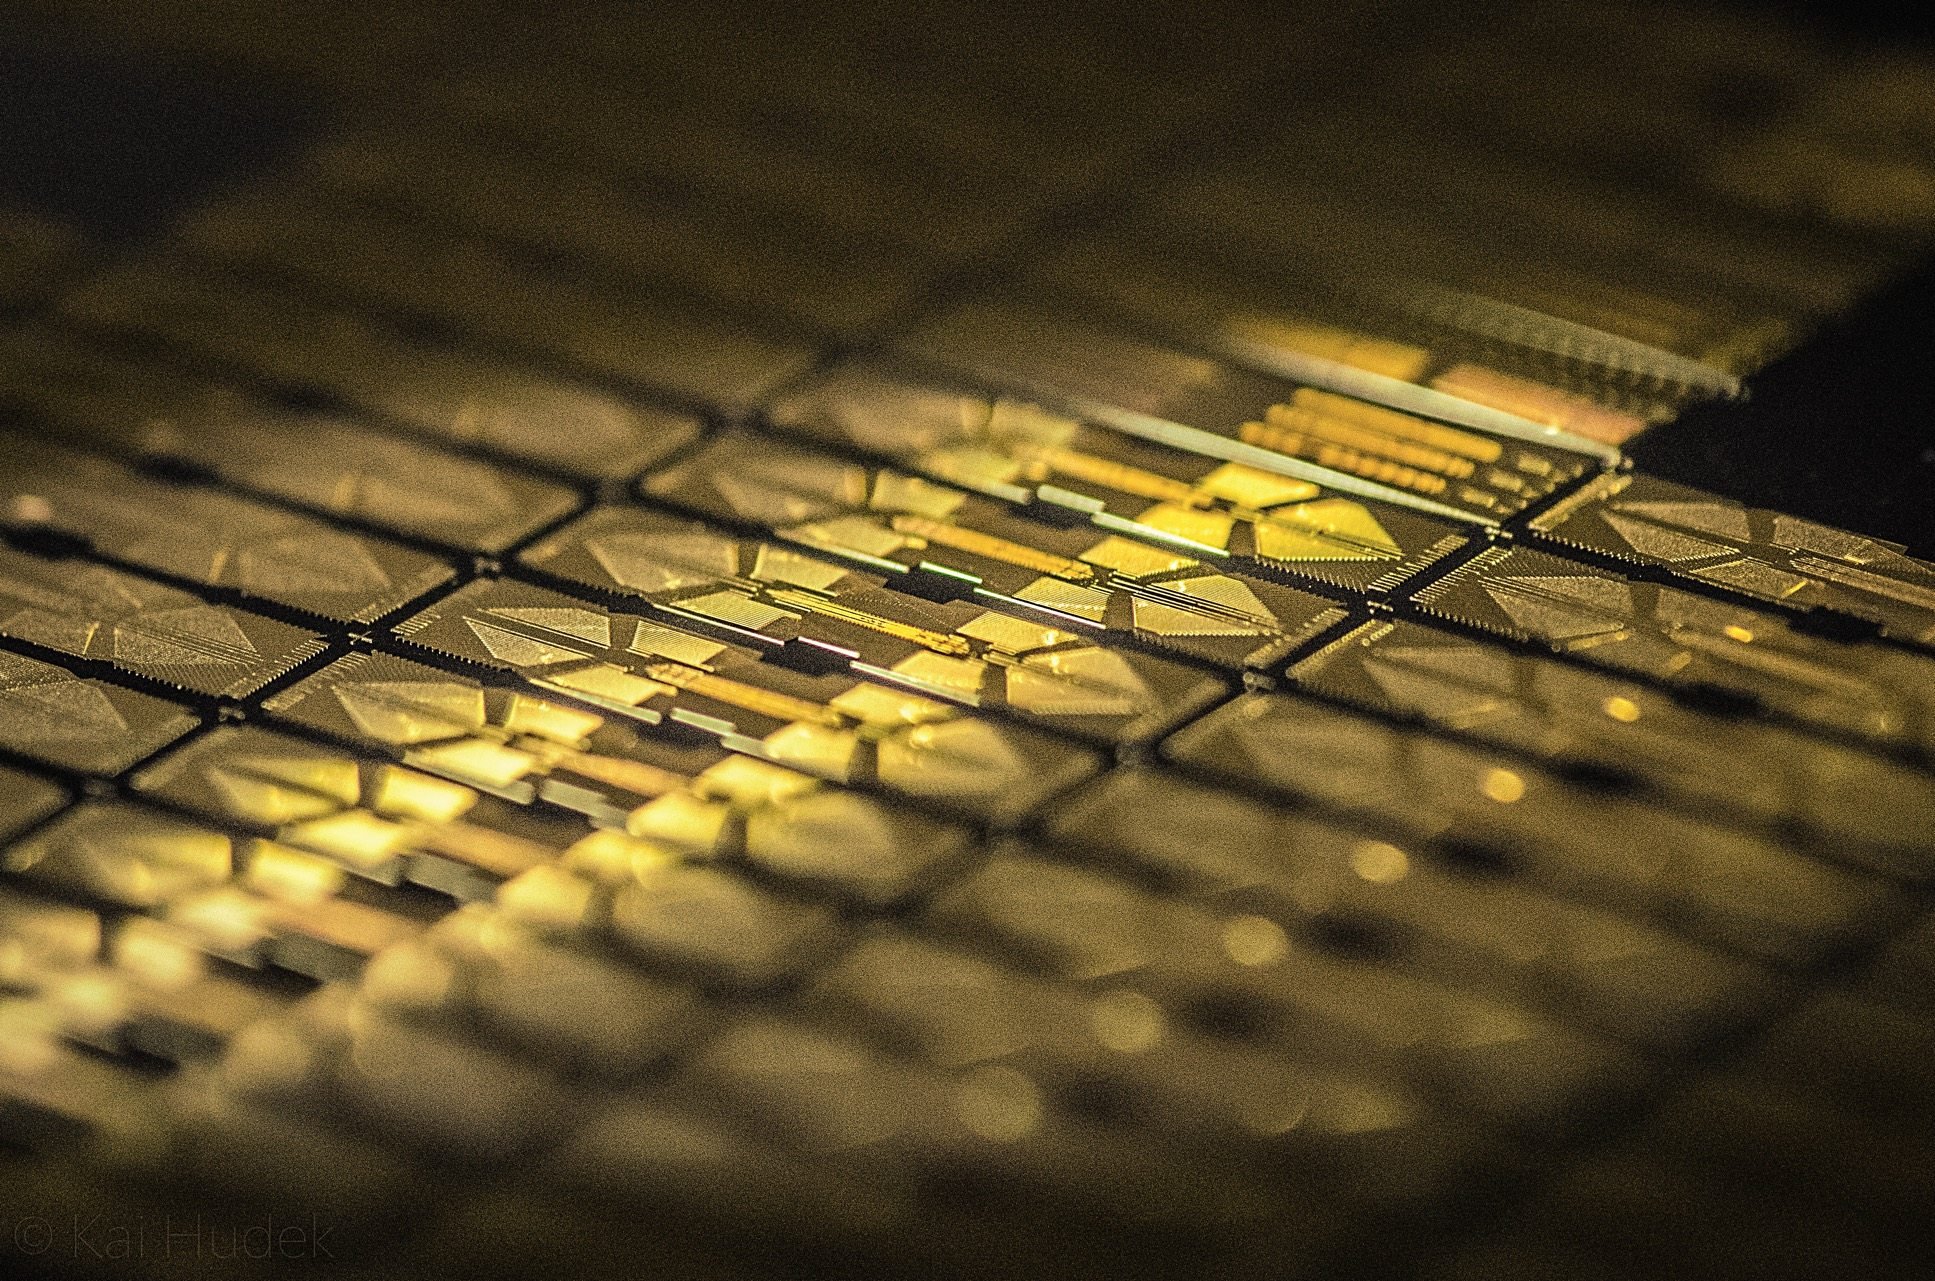 A test wafer used in the ion trap manufacturing process of IonQ, whose mission it is to build “the world’s best” quantum computers. Photo: Kai Hudek/IonQ